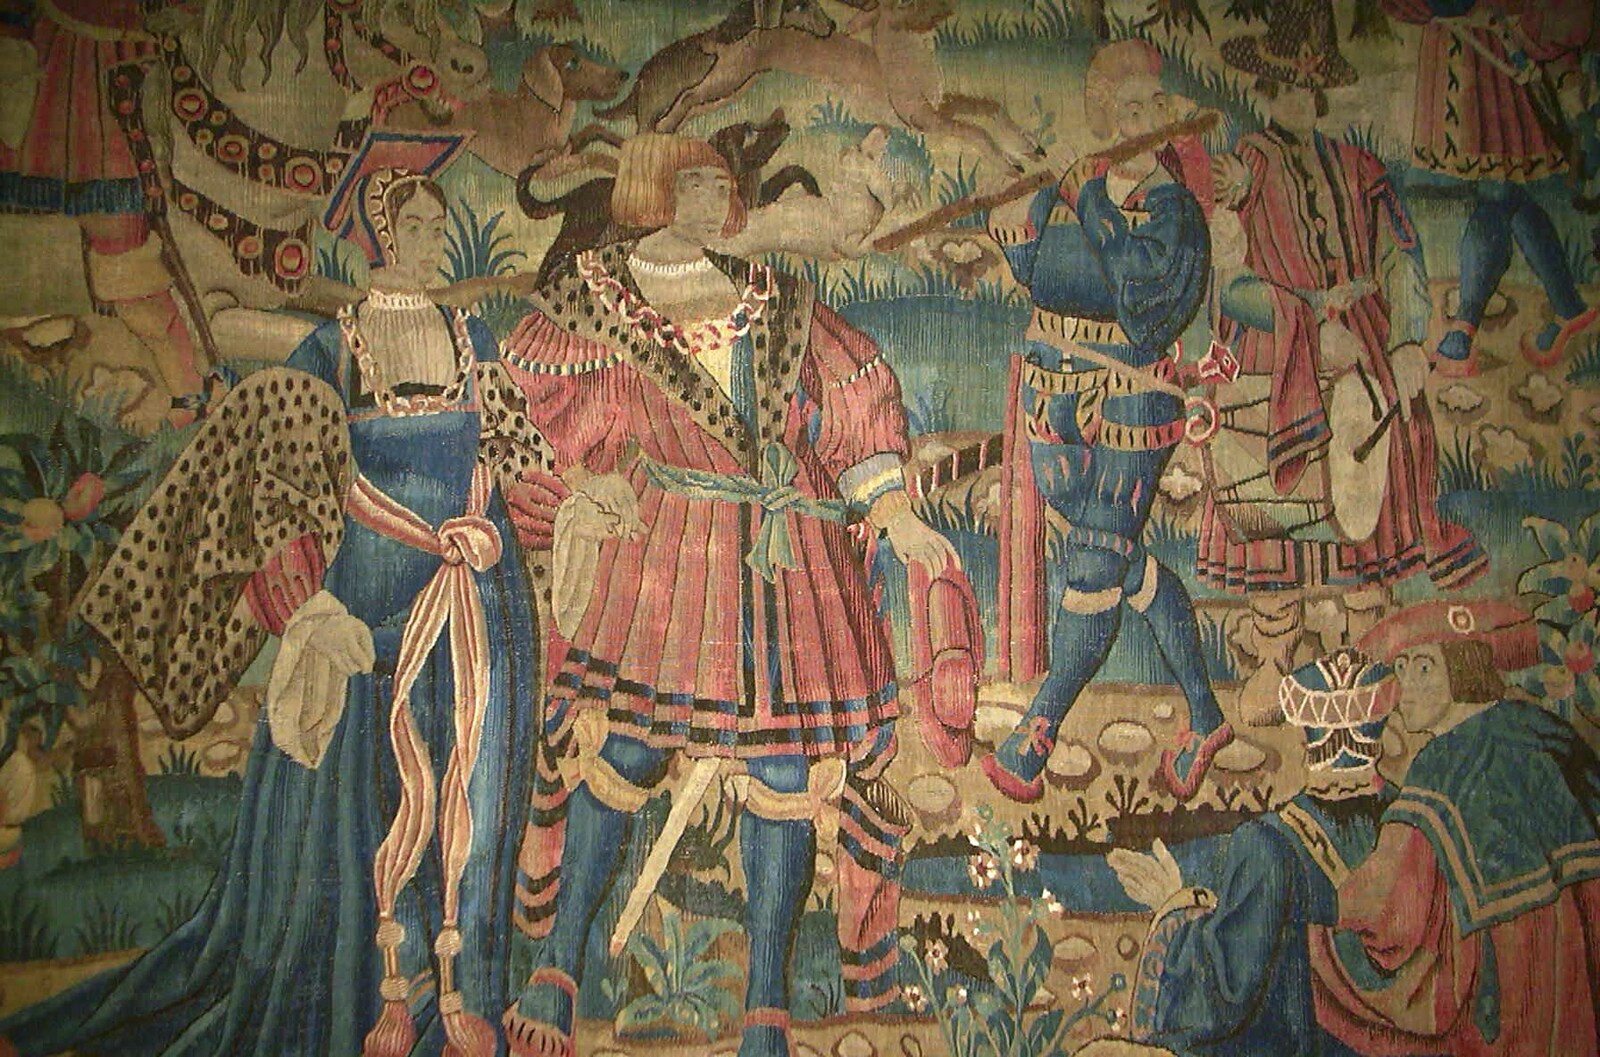 An old tapestry from A Short Holiday in Chivres, Burgundy, France - 21st July 2001